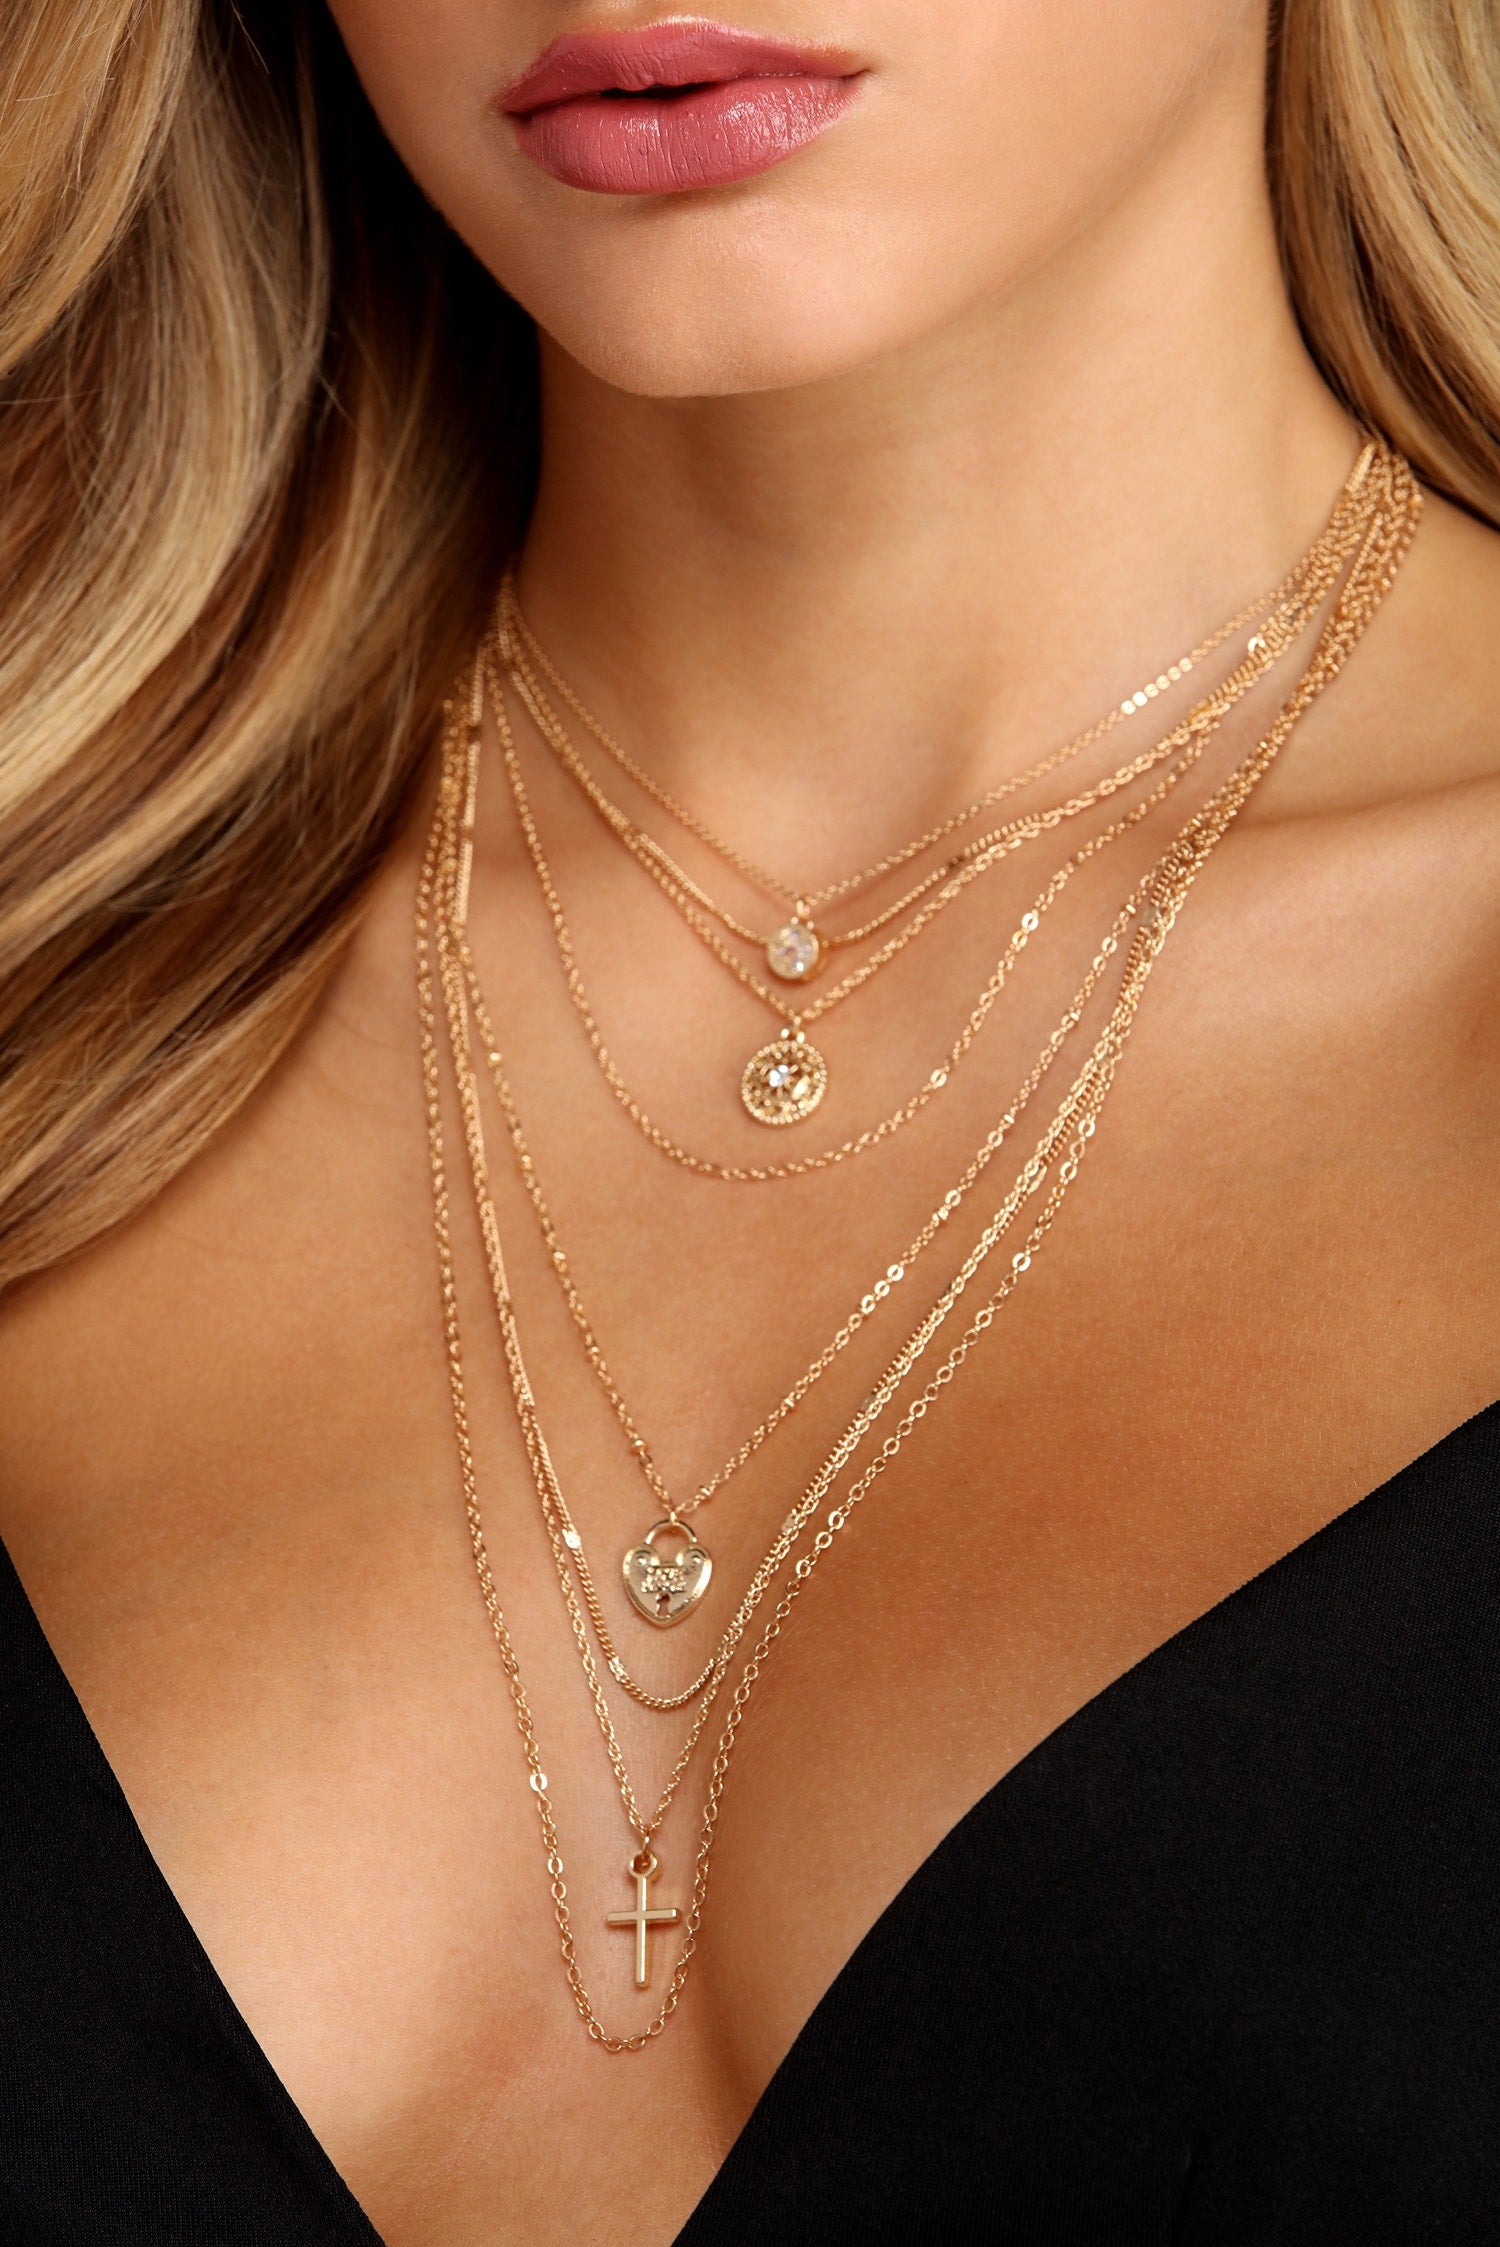 8 Row Layered Charm Necklaces